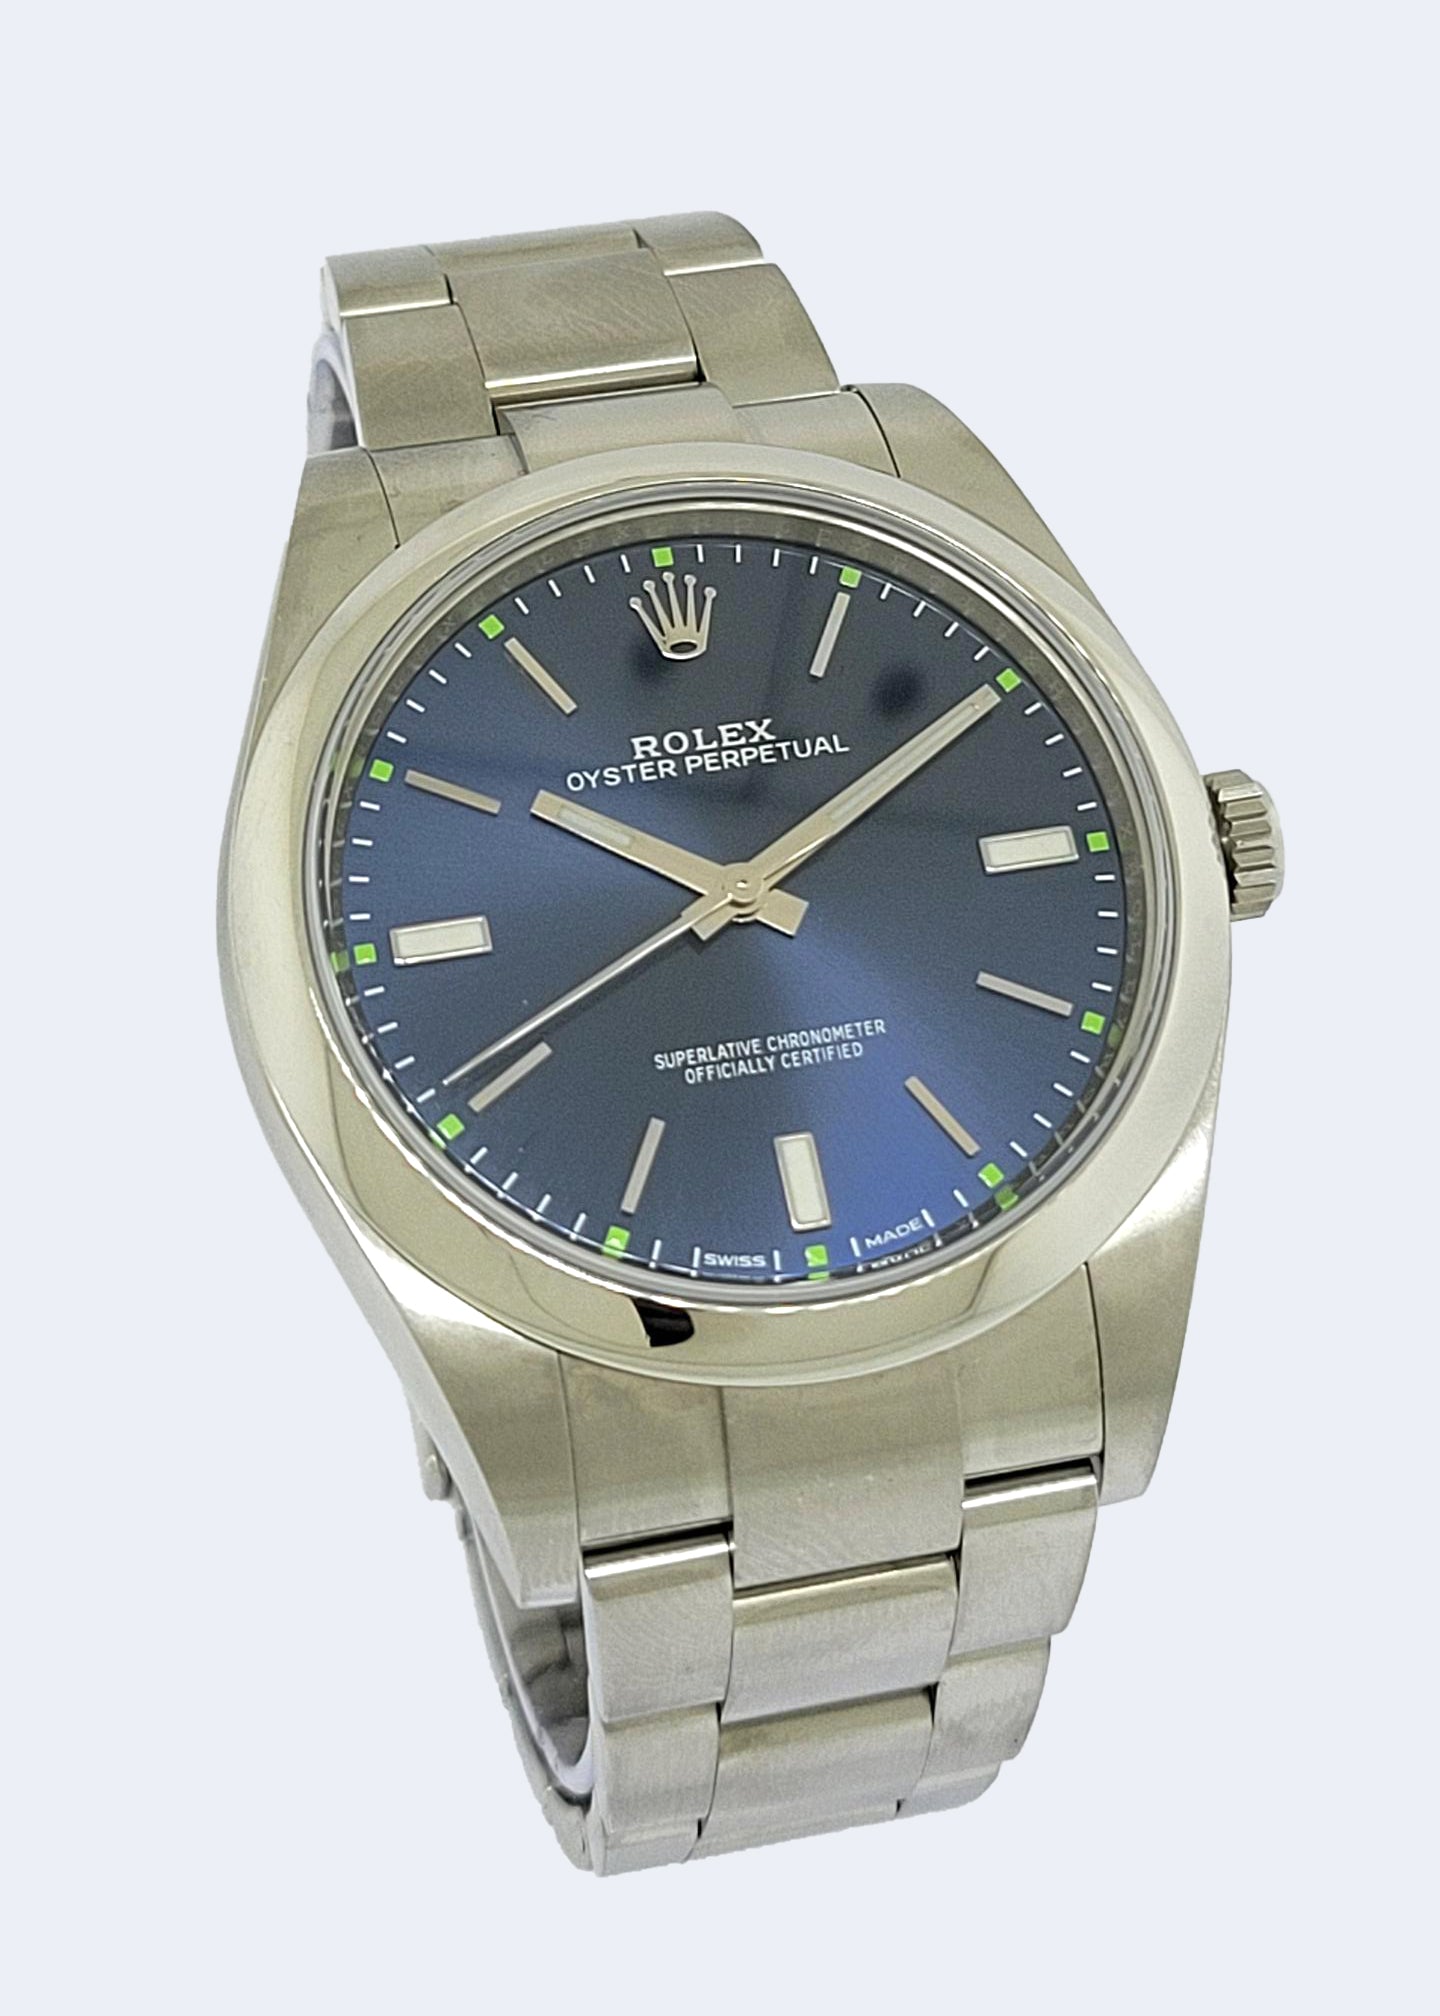 S/S Rolex Oyster Perpetual 39mm Reference 114300 Full Set